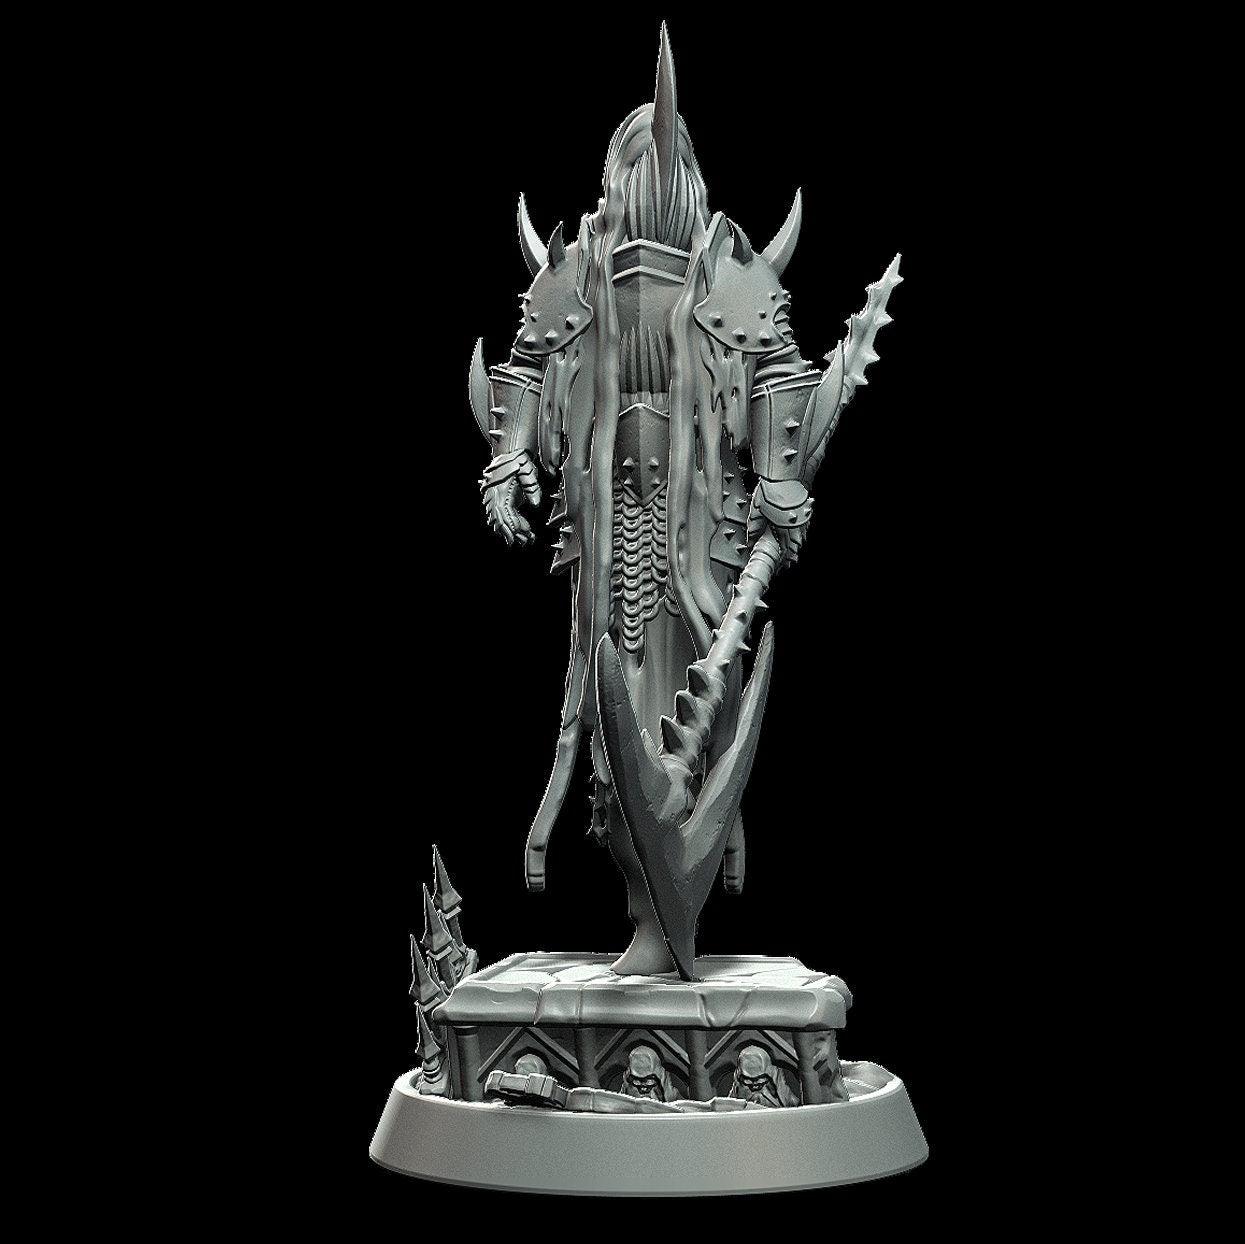 Corrupted Fiend Miniature - 3 Poses - 28mm scale Tabletop gaming DnD Miniature Dungeons and Dragons dnd 5e - Plague Miniatures shop for DnD Miniatures